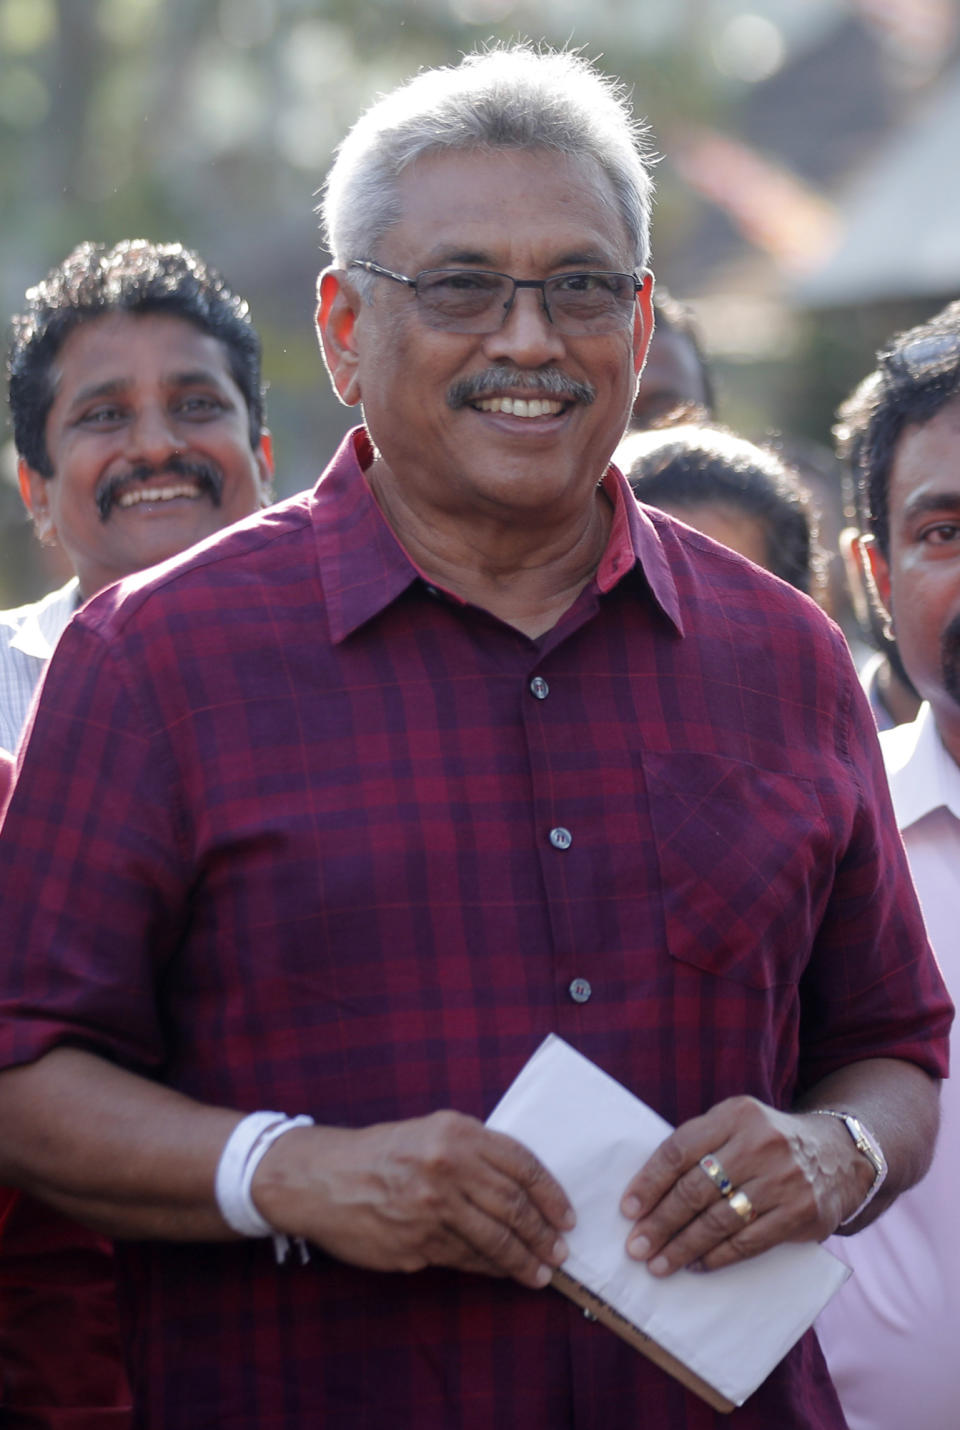 Sri Lanka's former Defense Secretary and presidential candidate Gotabaya Rajapaksa leaves a polling station after casting his vote in Embuldeniya, on the outskirts of Colombo, Sri Lanka, Saturday, Nov. 16, 2019. Polls opened in Sri Lanka’s presidential election Saturday after weeks of campaigning that largely focused on national security and religious extremism in the backdrop of the deadly Islamic State-inspired suicide bomb attacks on Easter Sunday. (AP Photo/Eranga Jayawardena)